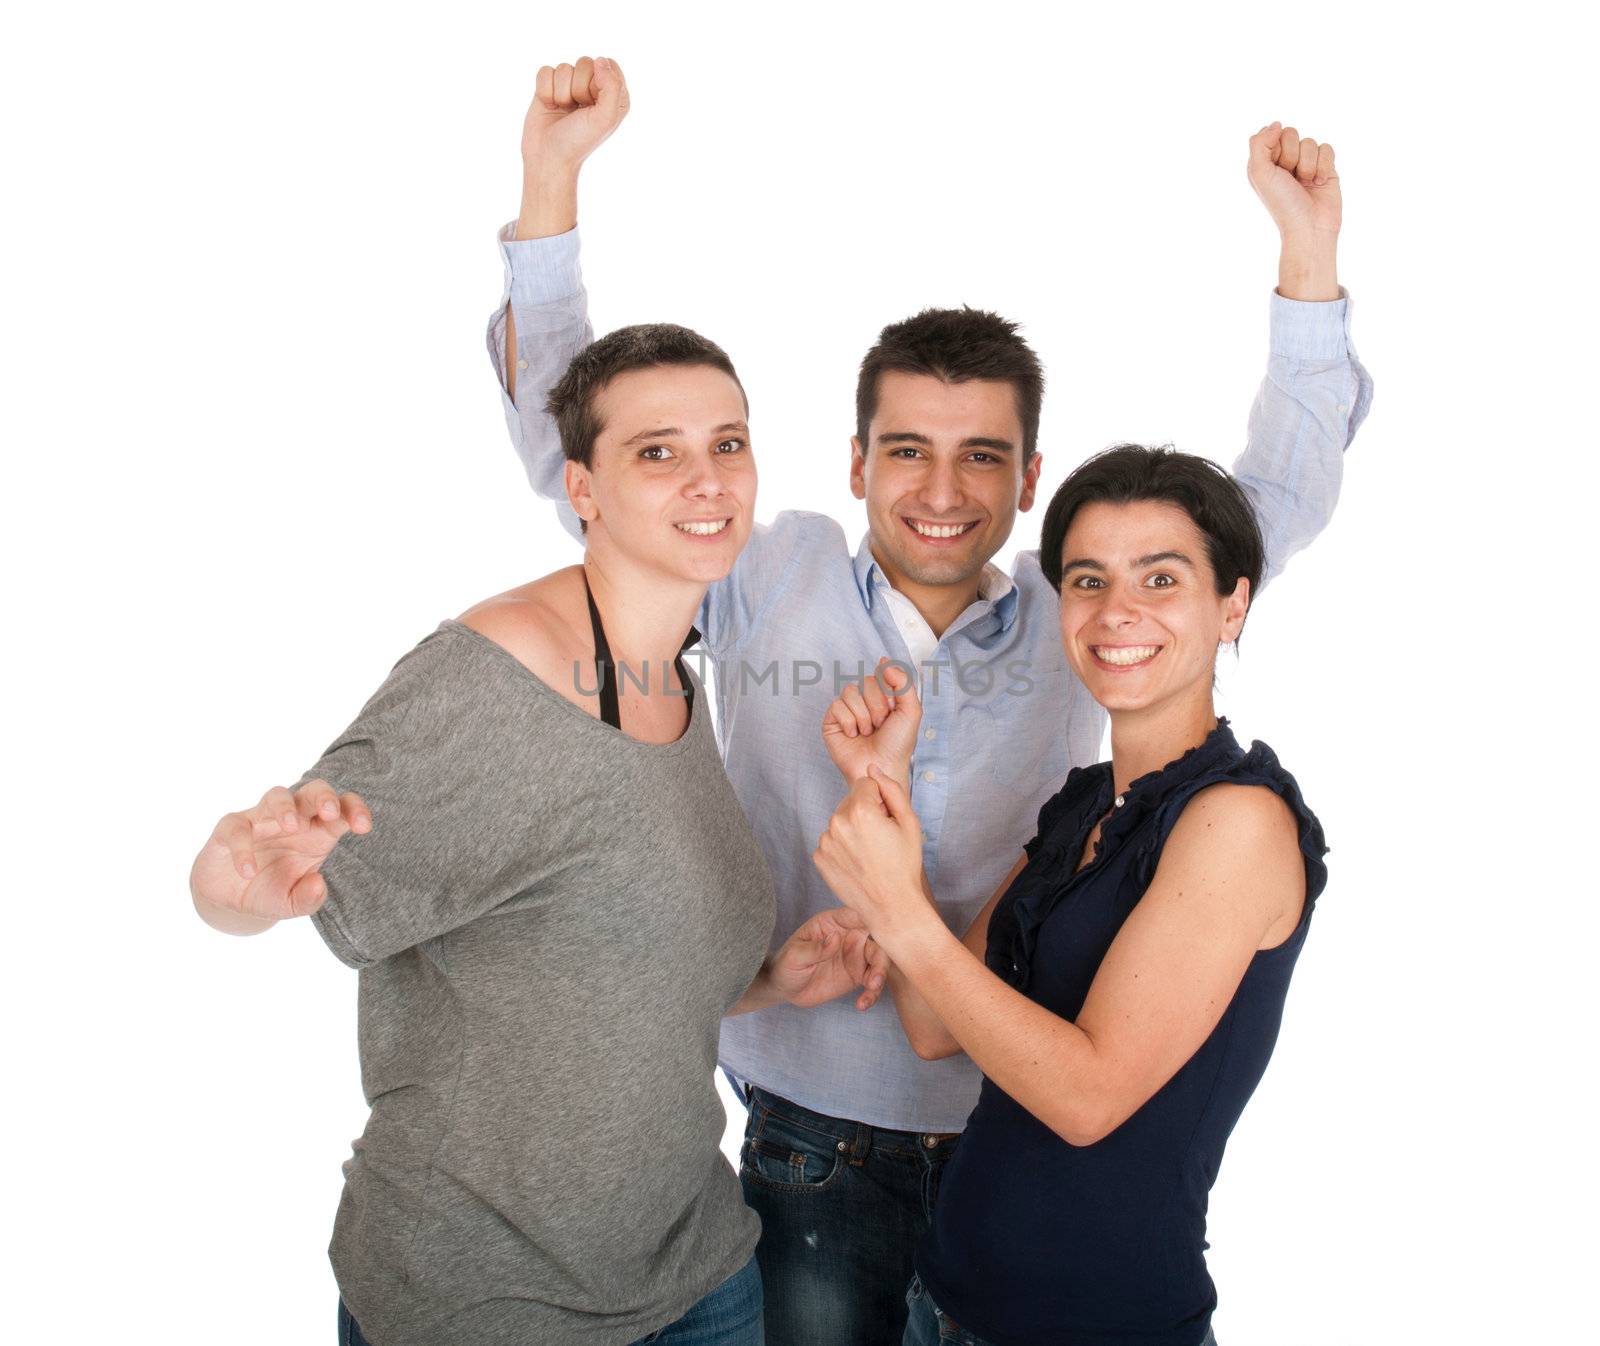 happy smiling brother and sisters having fun celebrating something, cheering and gesturing (isolated on white background)